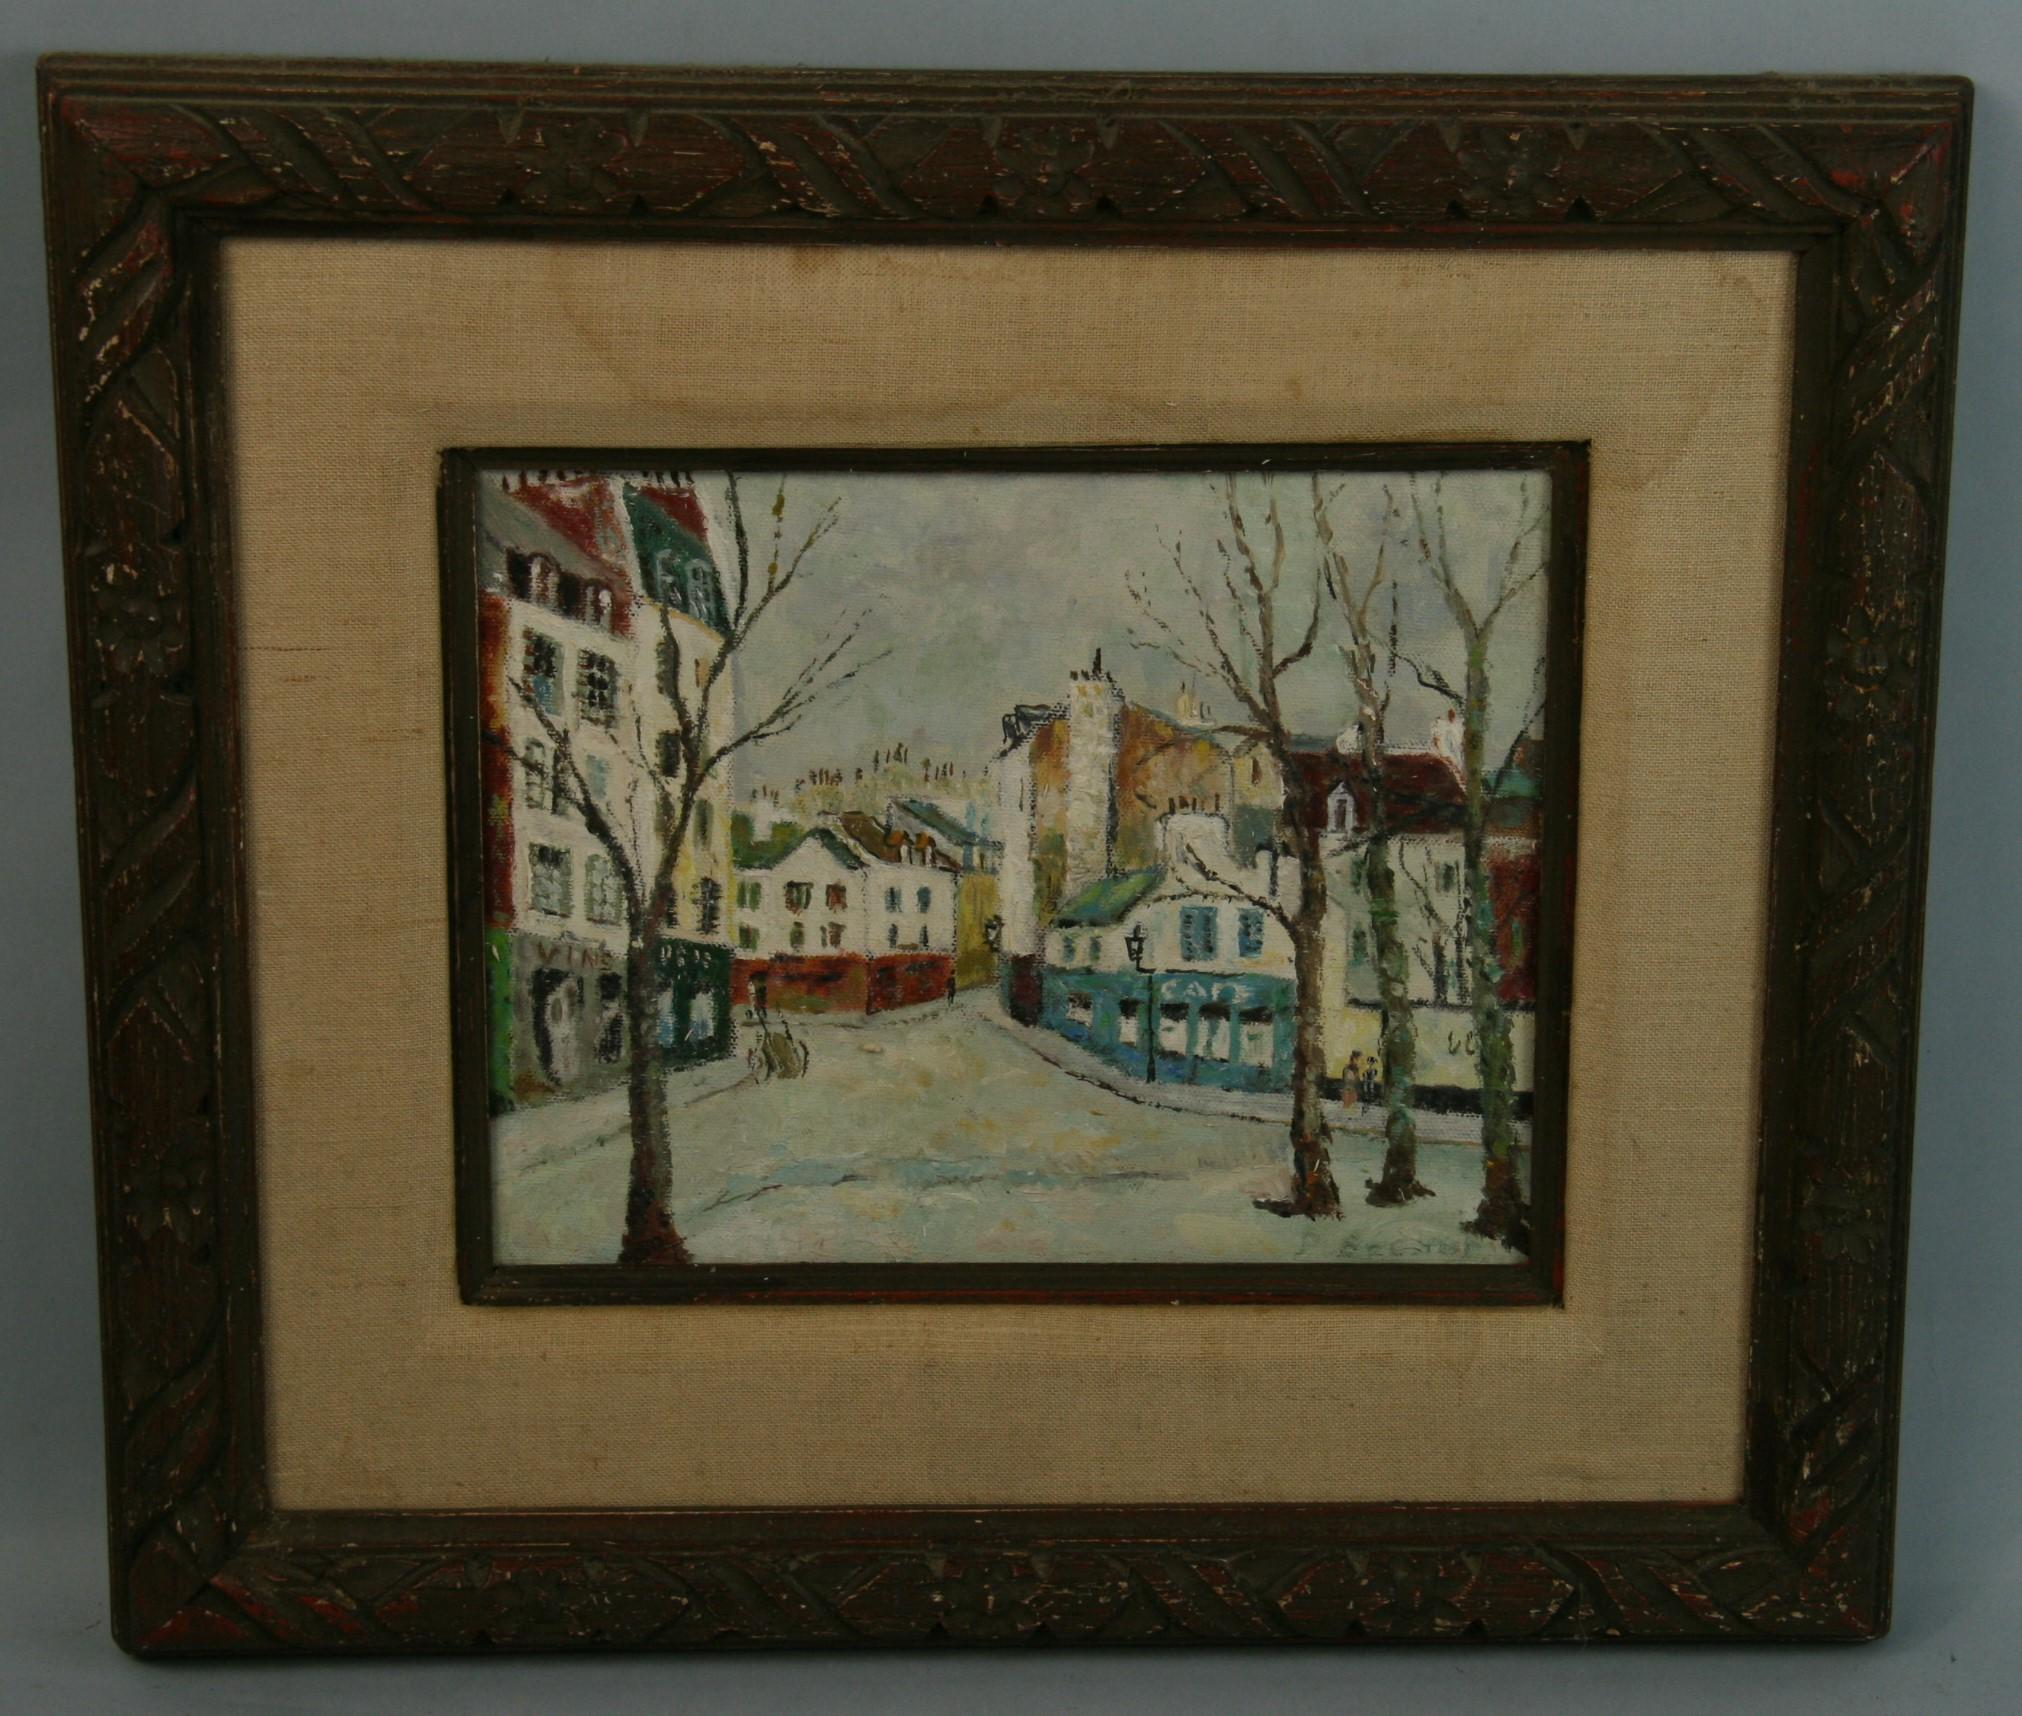 3830 Oil on canvas streets of old Paris
Image size 8x10